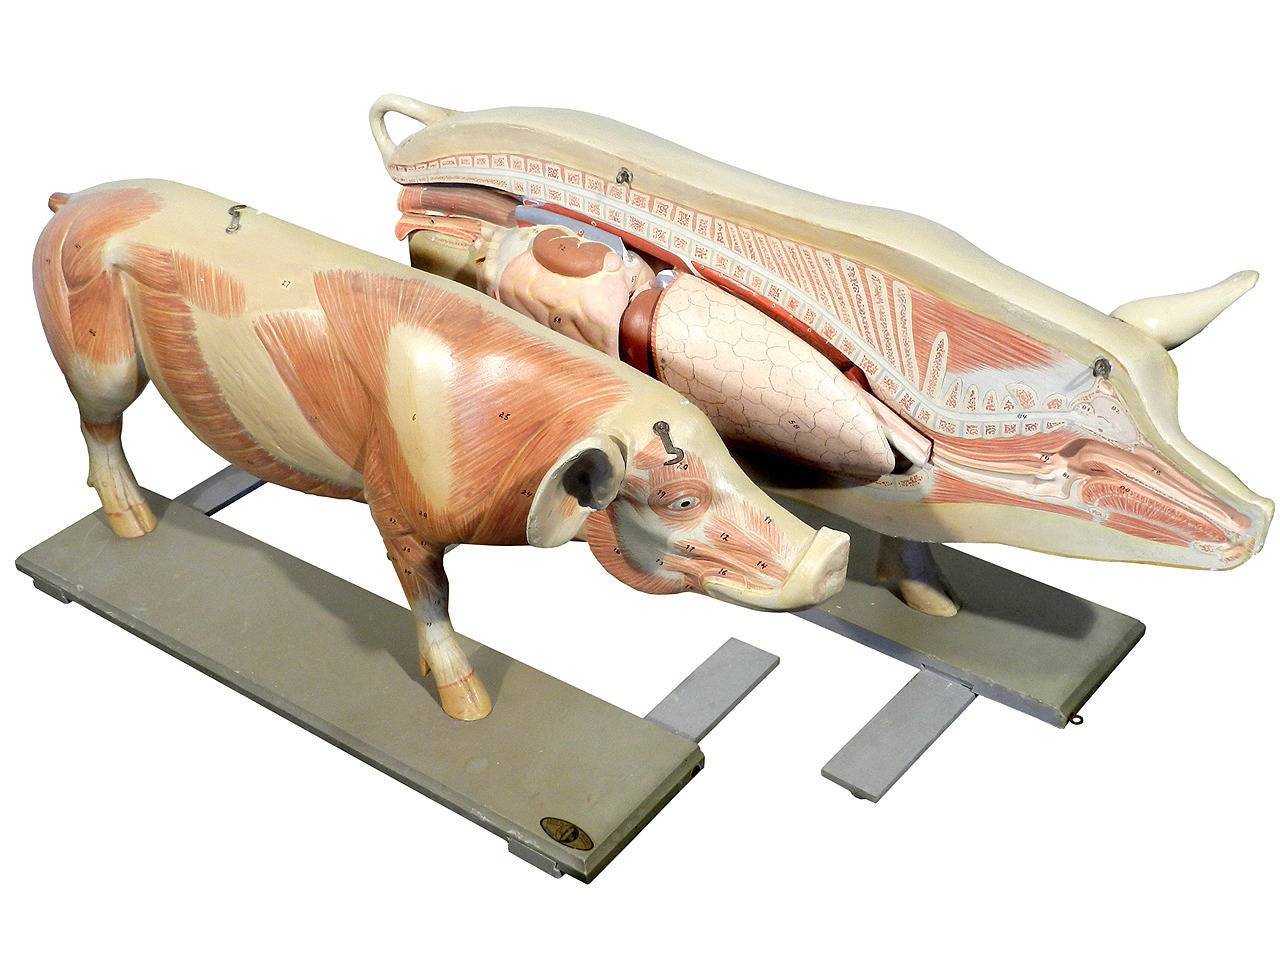 Industrial Life Size Anatomical Model of Pig, Germany